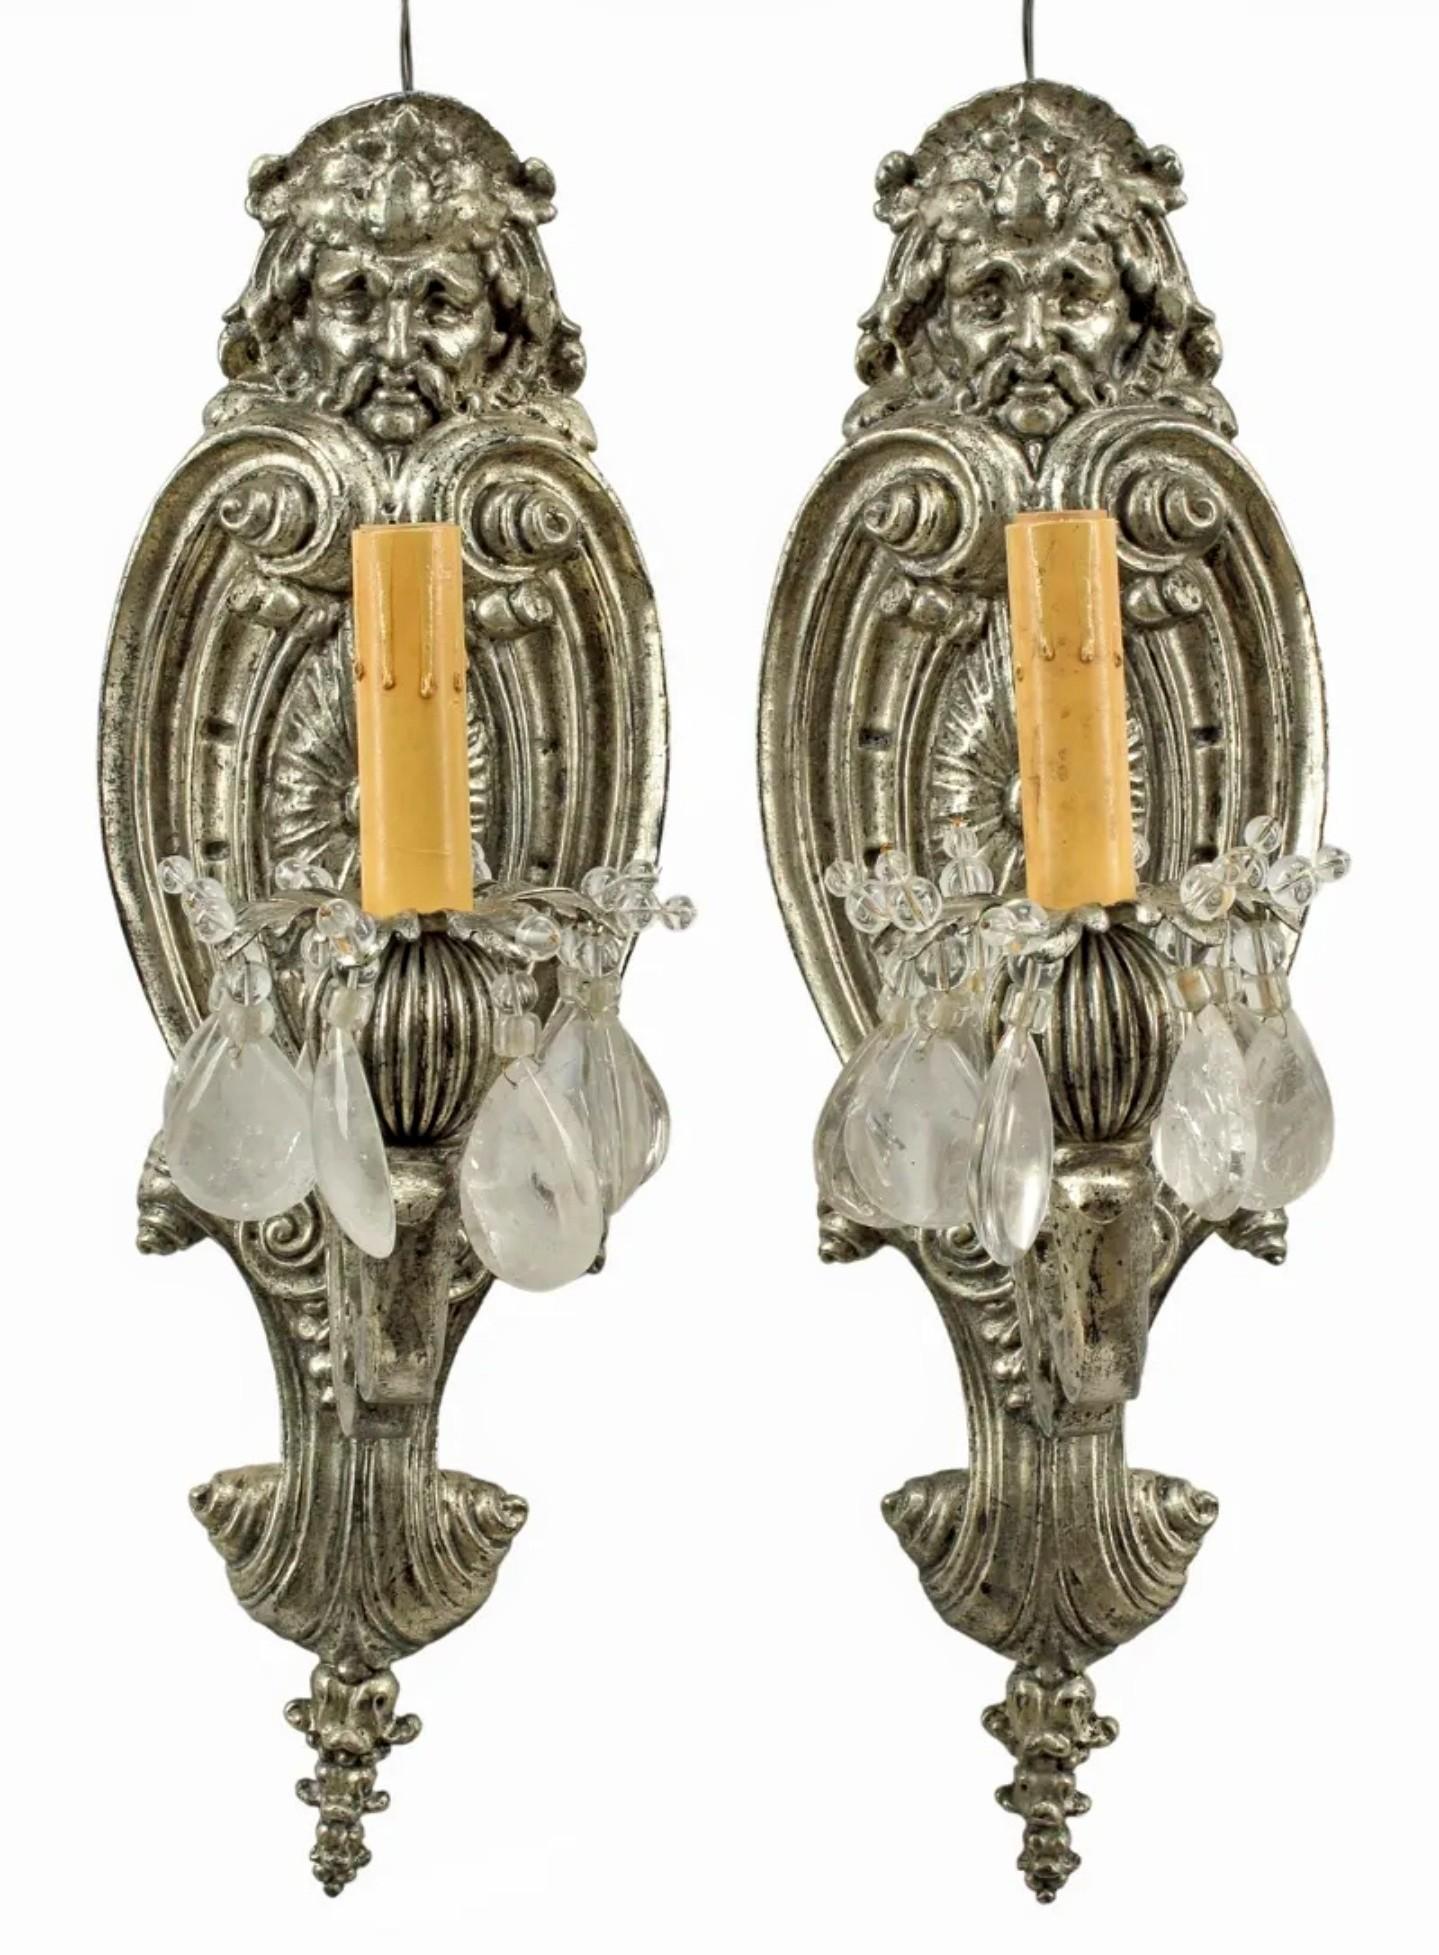 A stunning pair of European Baroque style silvered bronze one-light wall sconces, possibly attributed to Maison Bagues (French, 1860-), featuring sculptural figural scroll motif with single faux candle and rock crystal prisms. 

Dimensions: